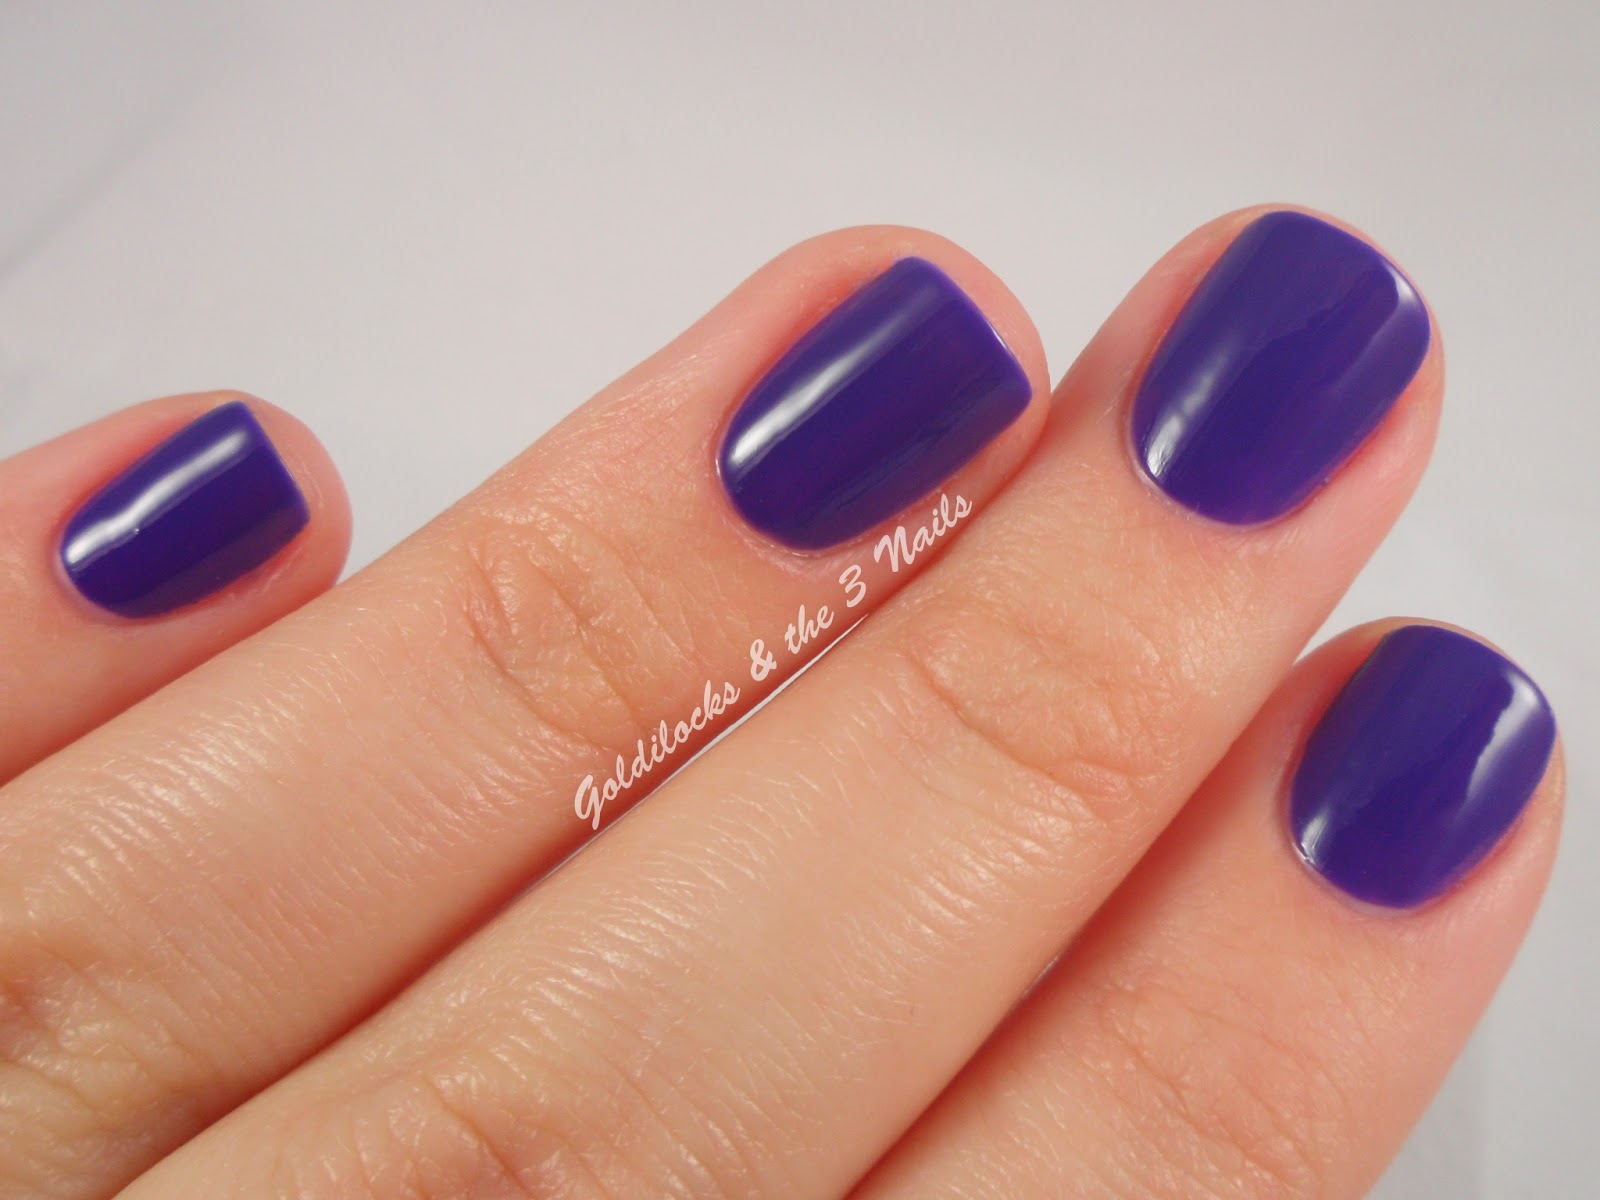 8. OPI Nail Lacquer in "Do You Have This Color in Stock-holm?" - wide 11